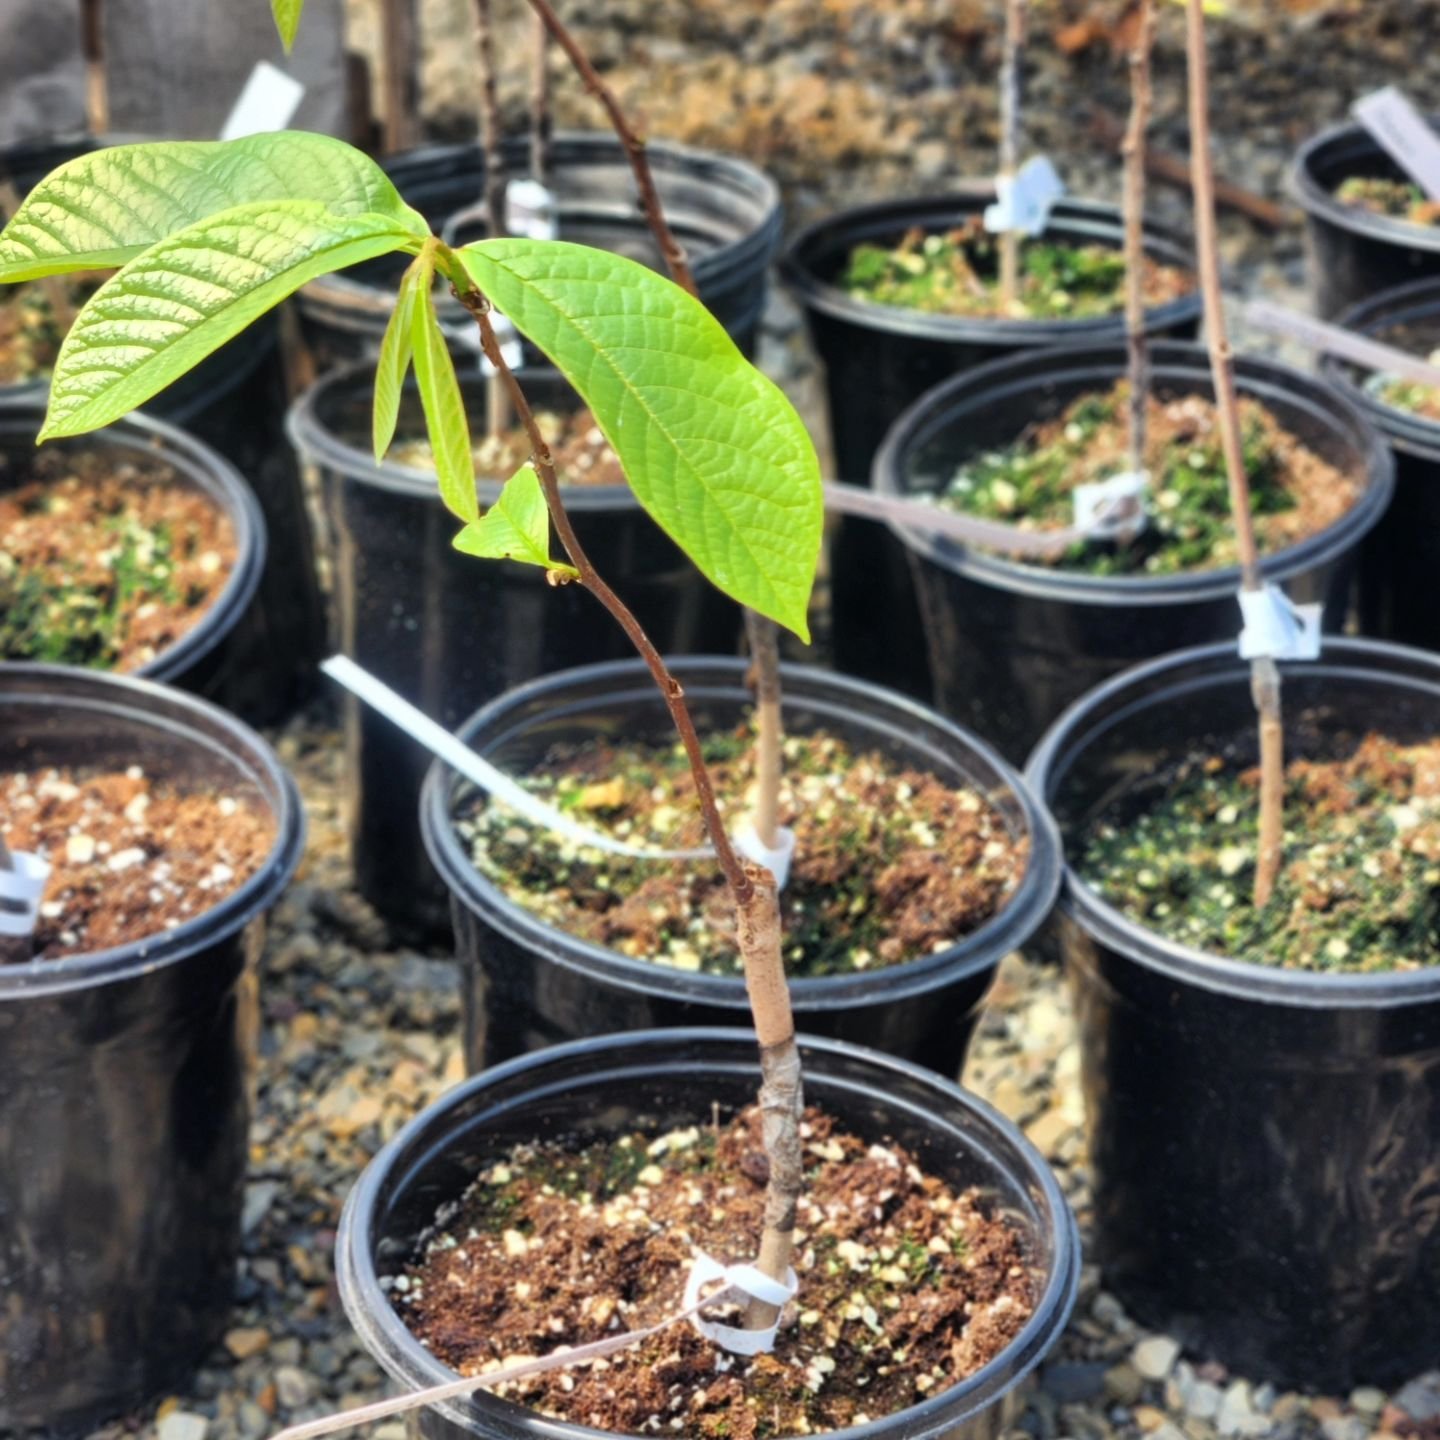 &quot;If you pick a paw paw or a prickly pear...&quot; The next generation of pawpaw trees! Cultivated varieties from Hidden Springs Nursery (first pic) grown from seed from fruit at West farm nursery (second pic)

#pawpaw #cidery #craftcider
#pinkbo